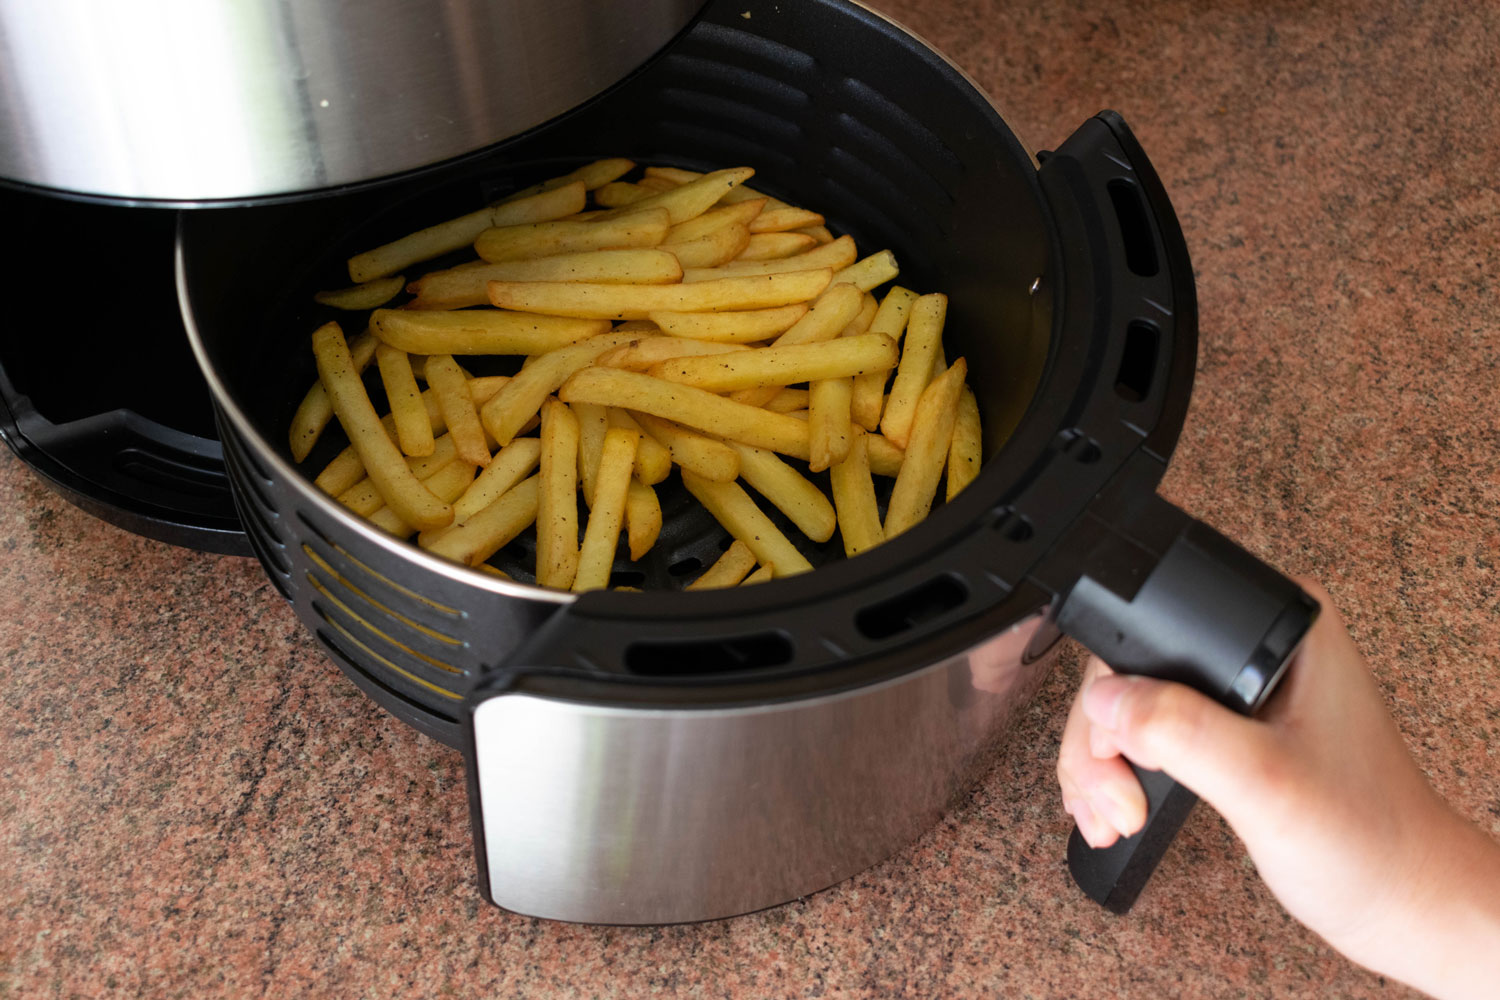 Putting french fries in the air fryer